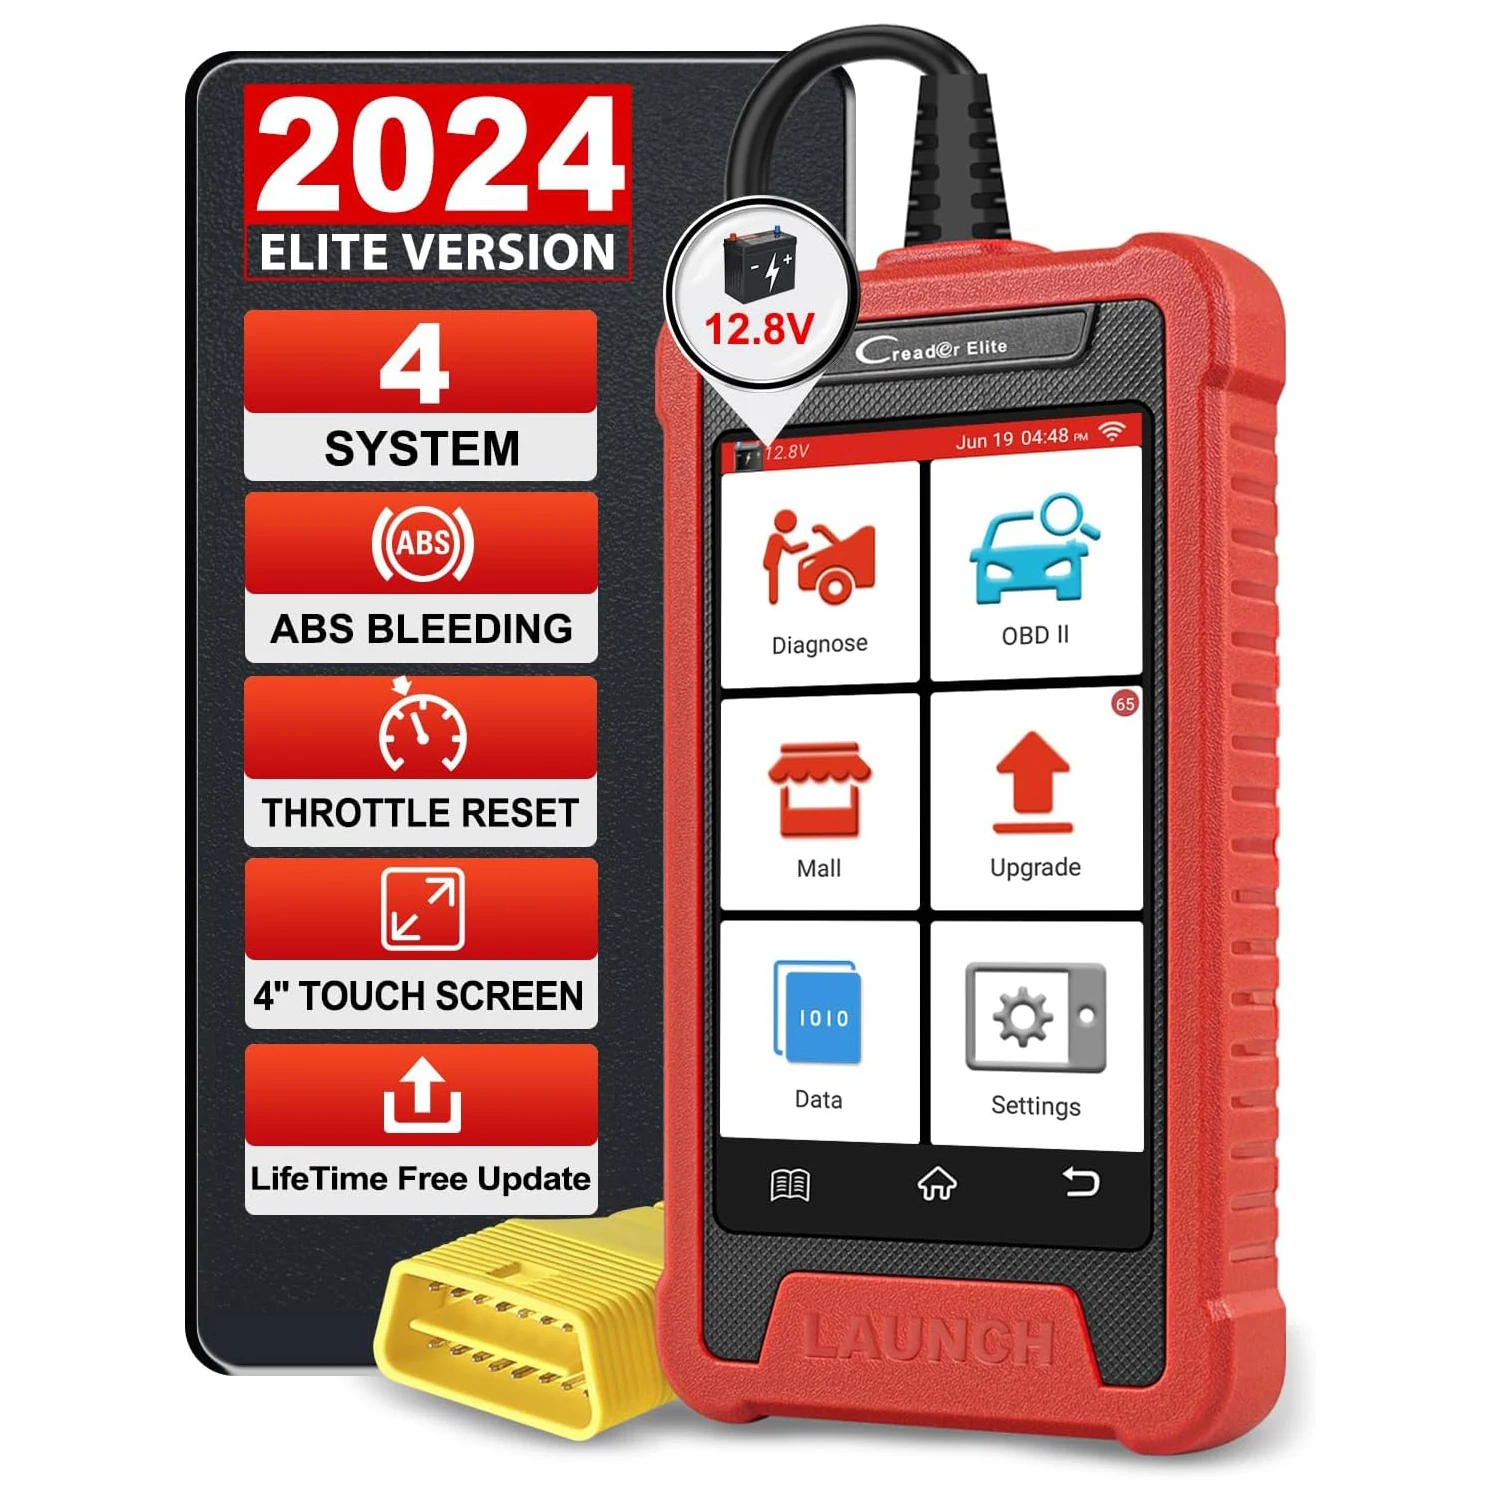 

Launch Creader Elite 200 OBD2 Scanner 2024 Newest Four System Car Diagnostic Scan Tool WiFi Lifetime Free Update